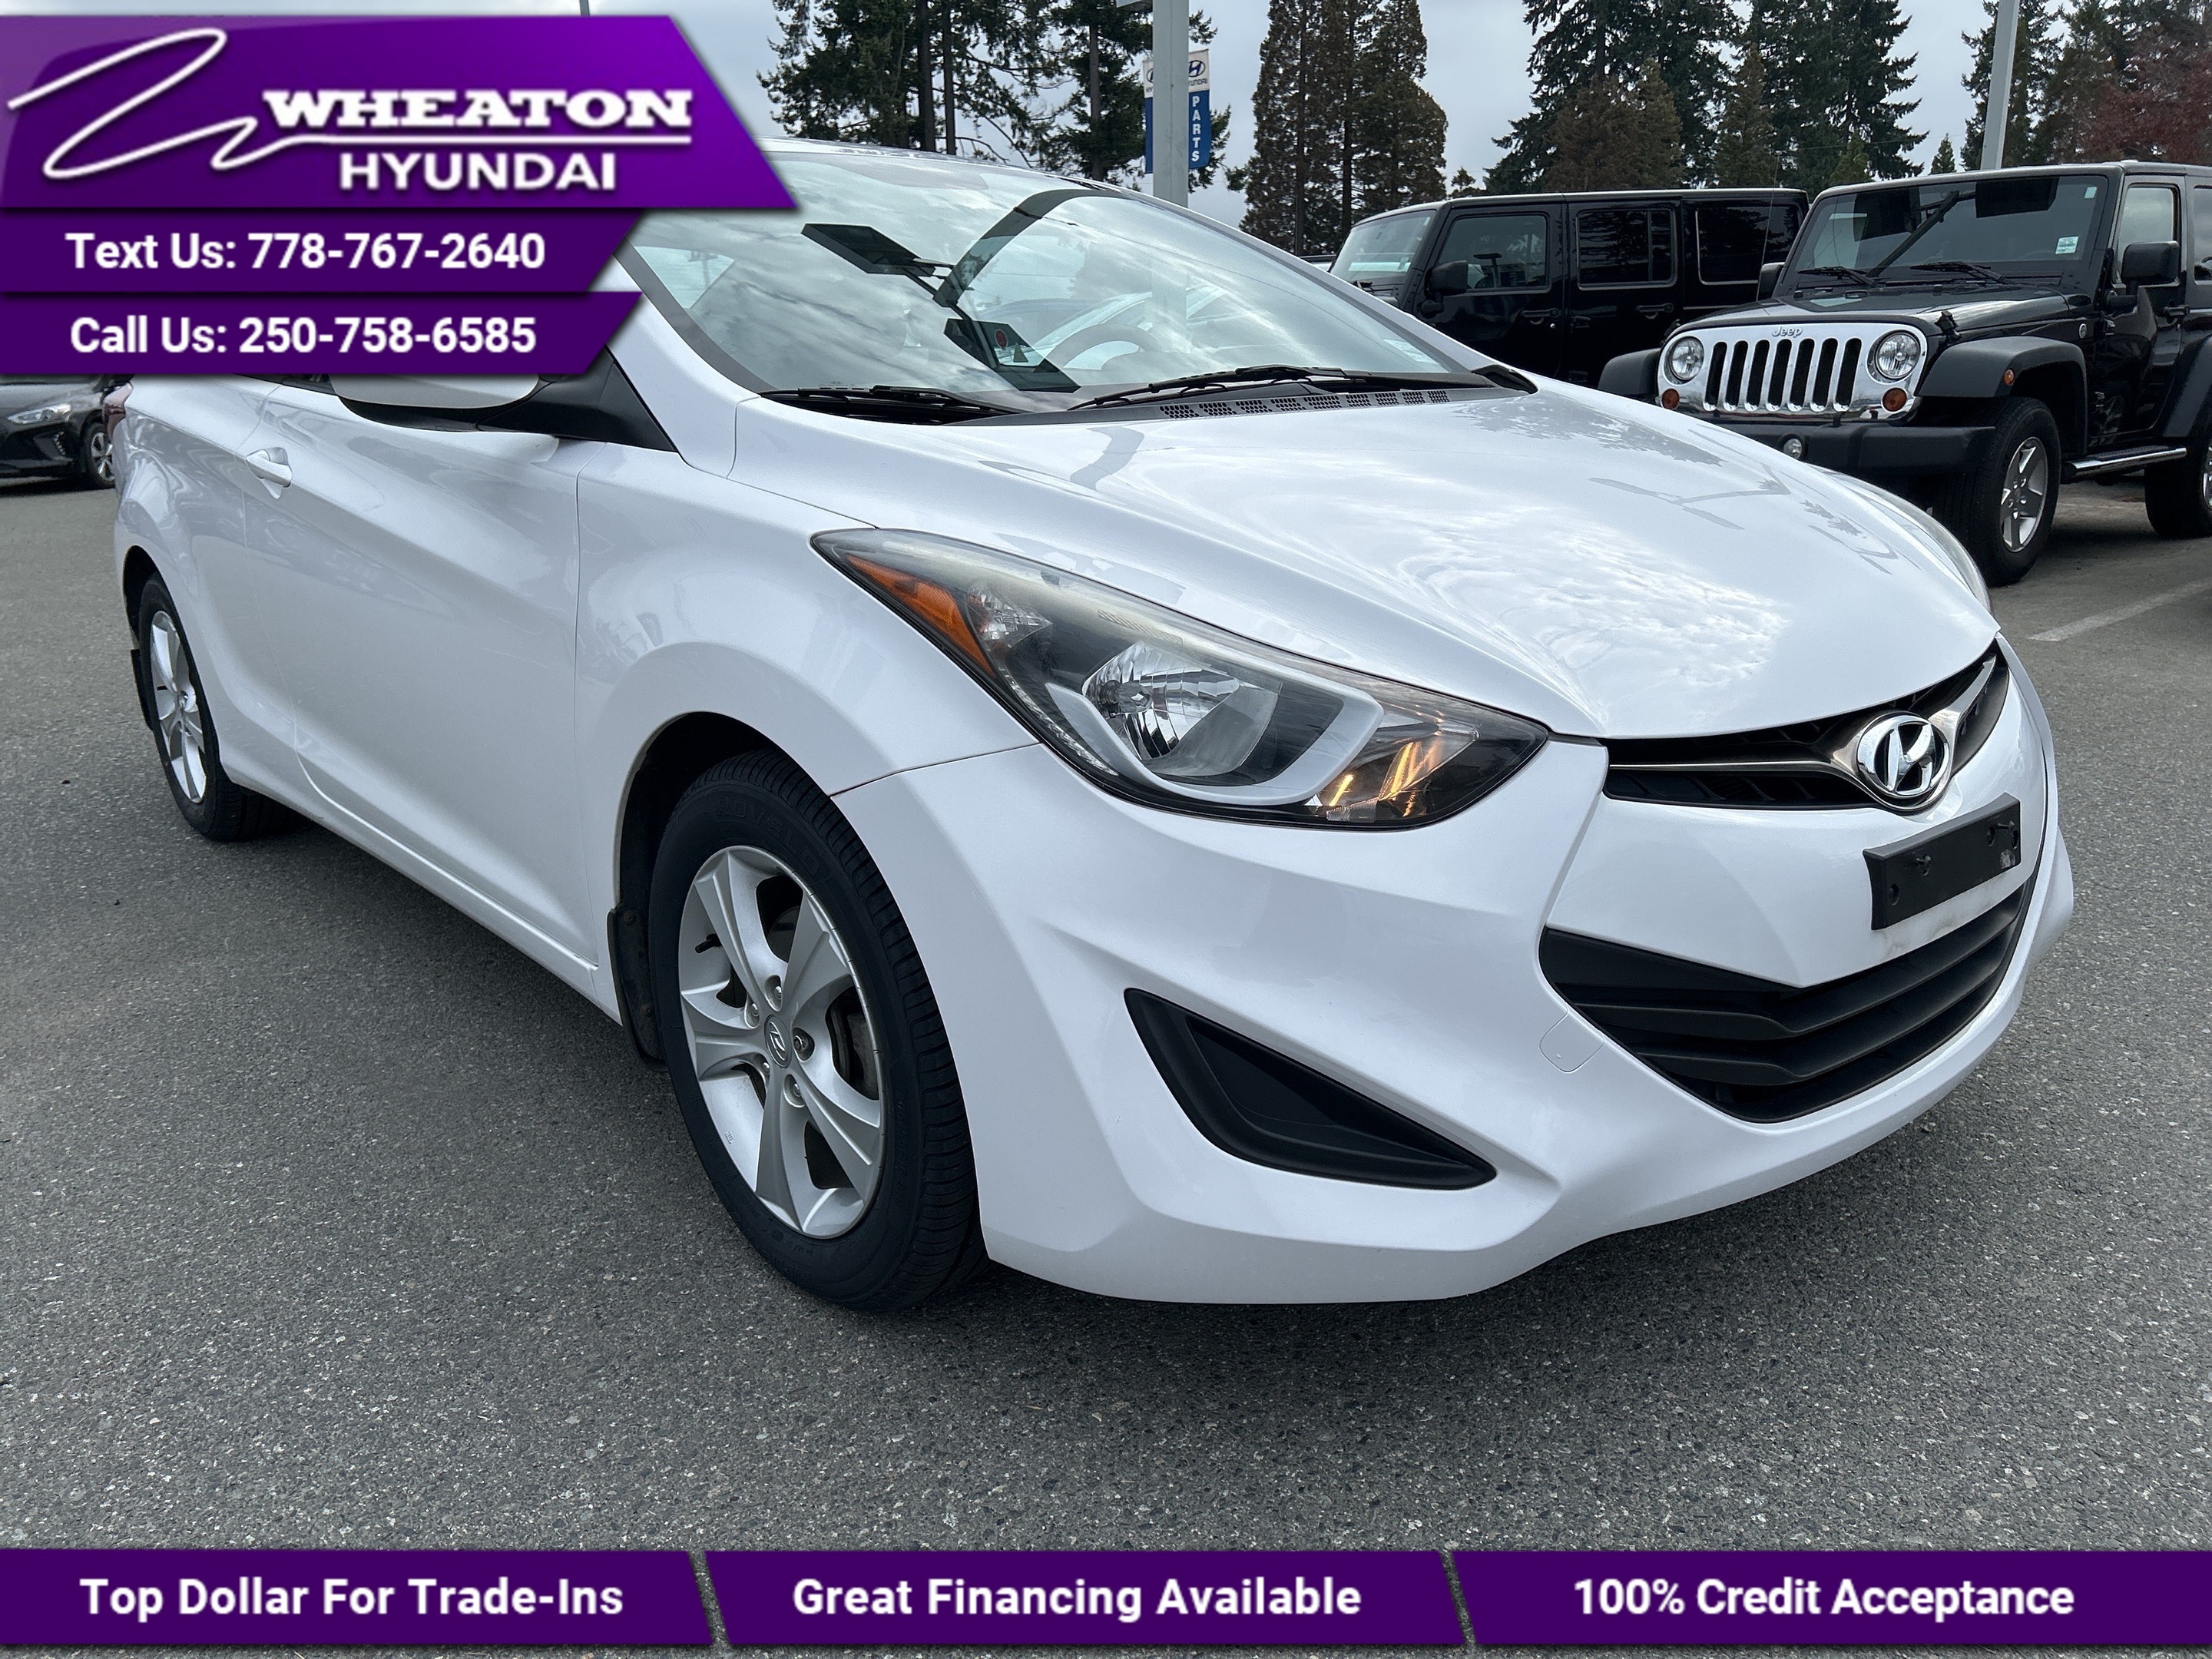 2014 Hyundai Elantra Coupe GL, One Owner, No Accidents, Local, Trade in, Heat